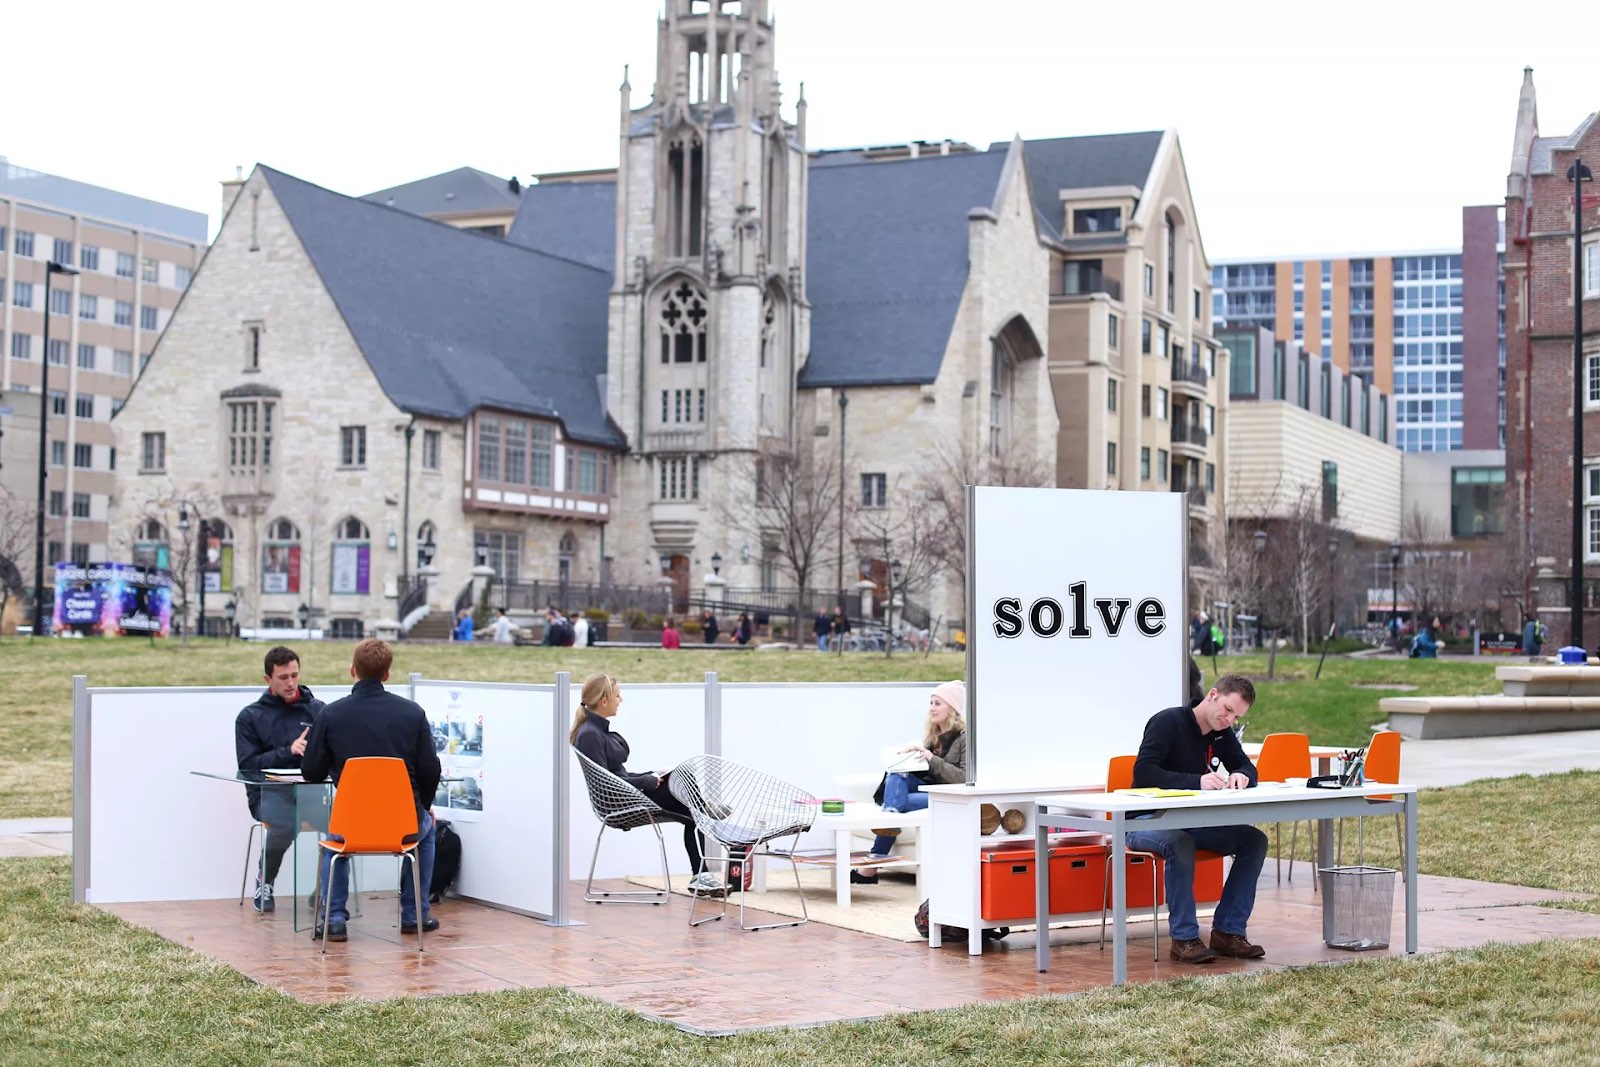 Solve's pop-up office on a college campus